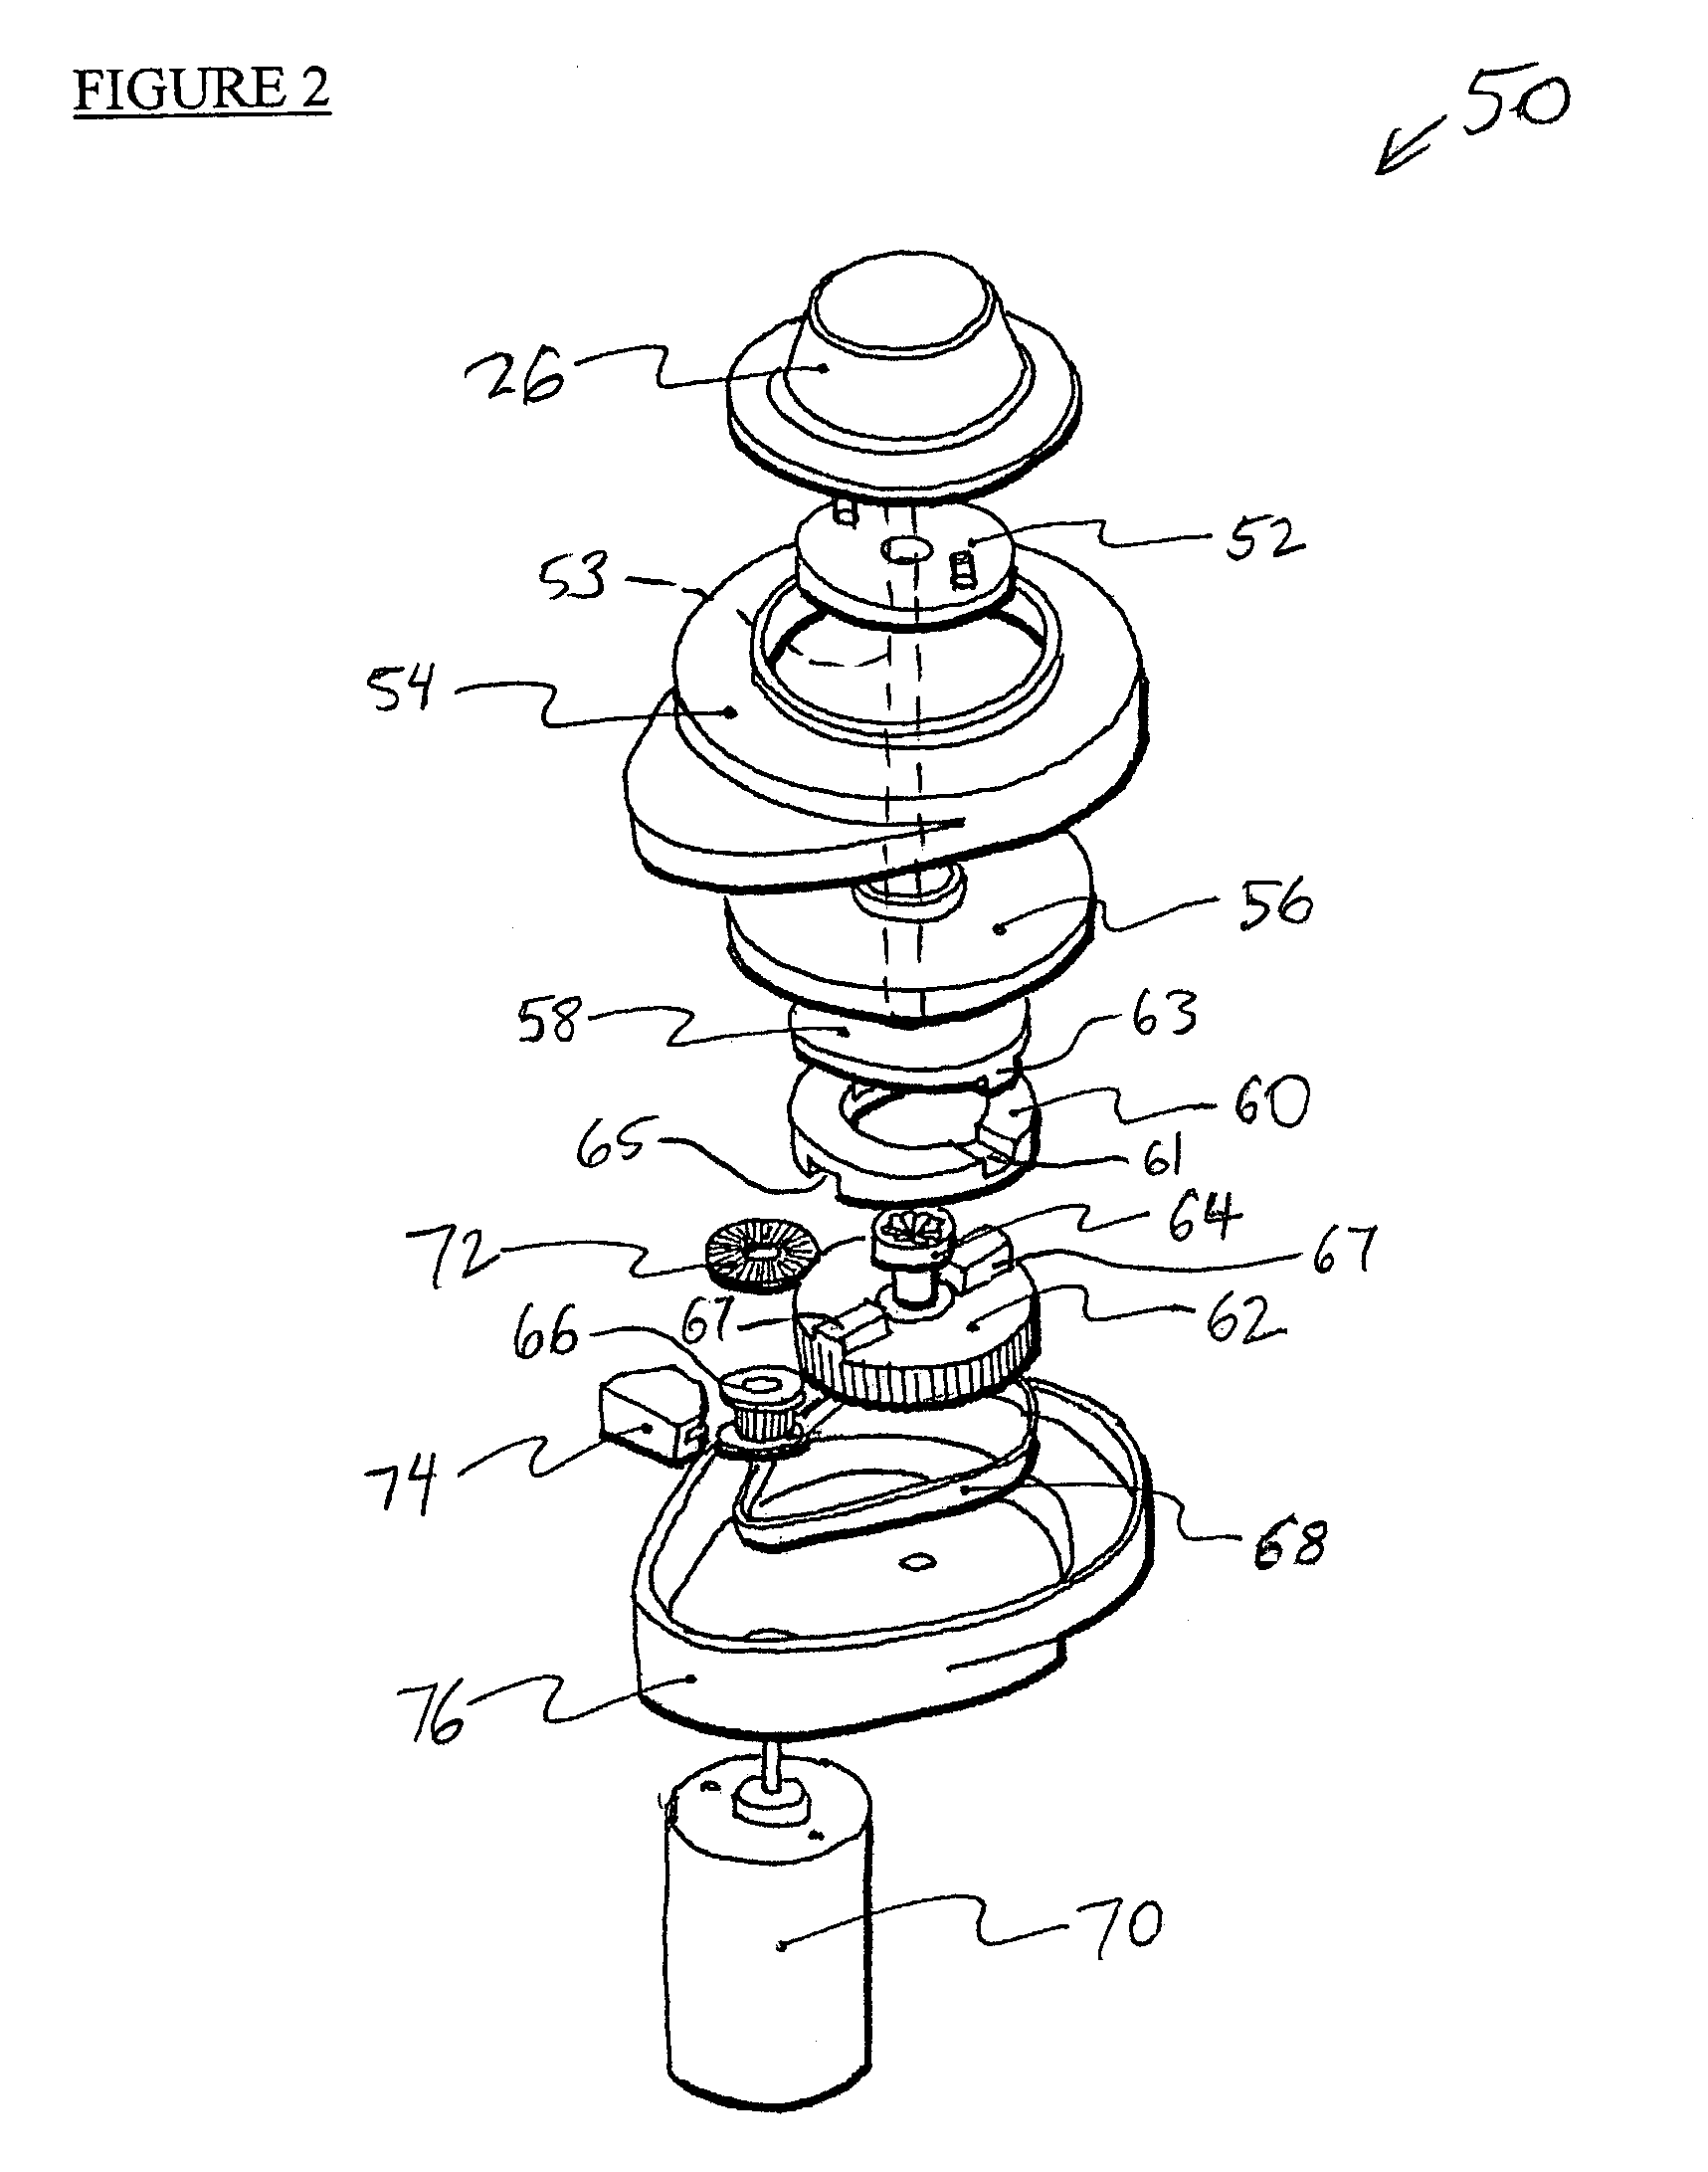 Mechanisms for control knobs and other interface devices